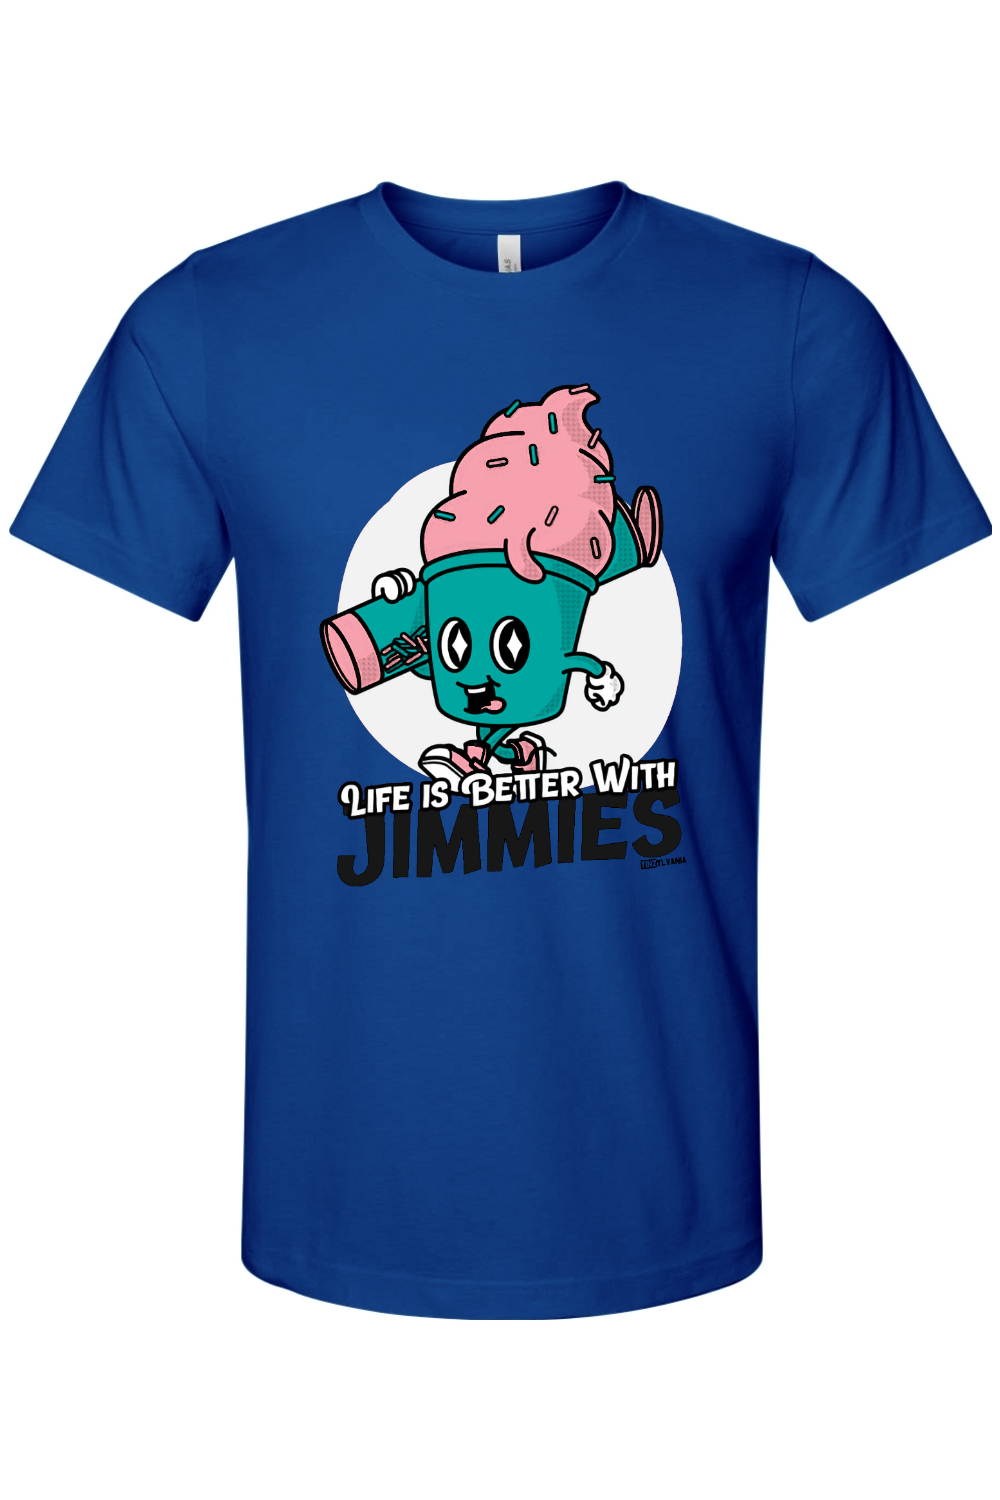 Life is Better with Jimmies - Bella + Canvas Jersey Tee - Yinzylvania